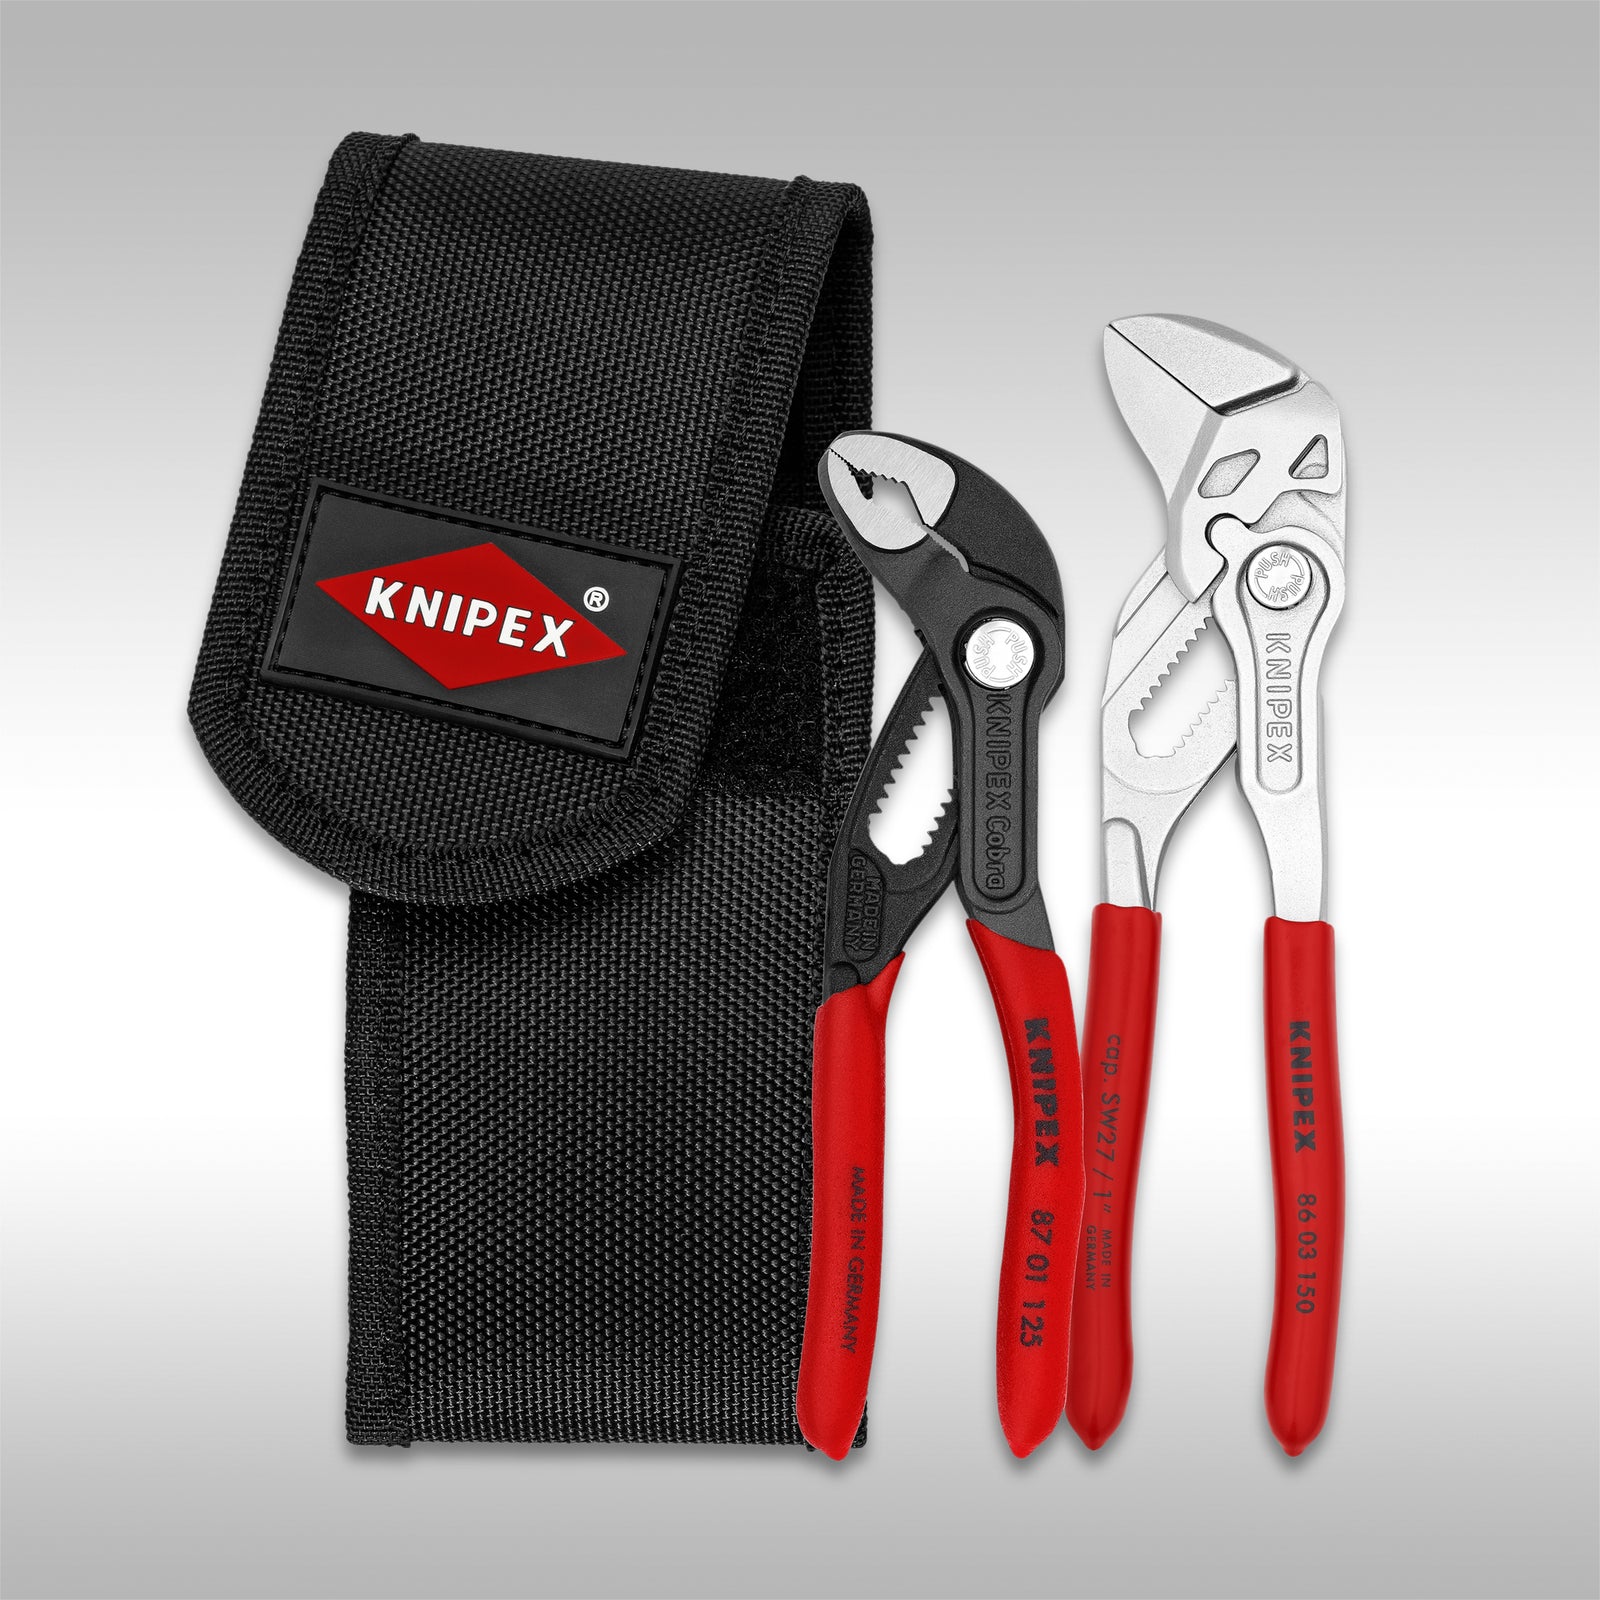 ALL Tagged Knipex - Upshift Online Inc.